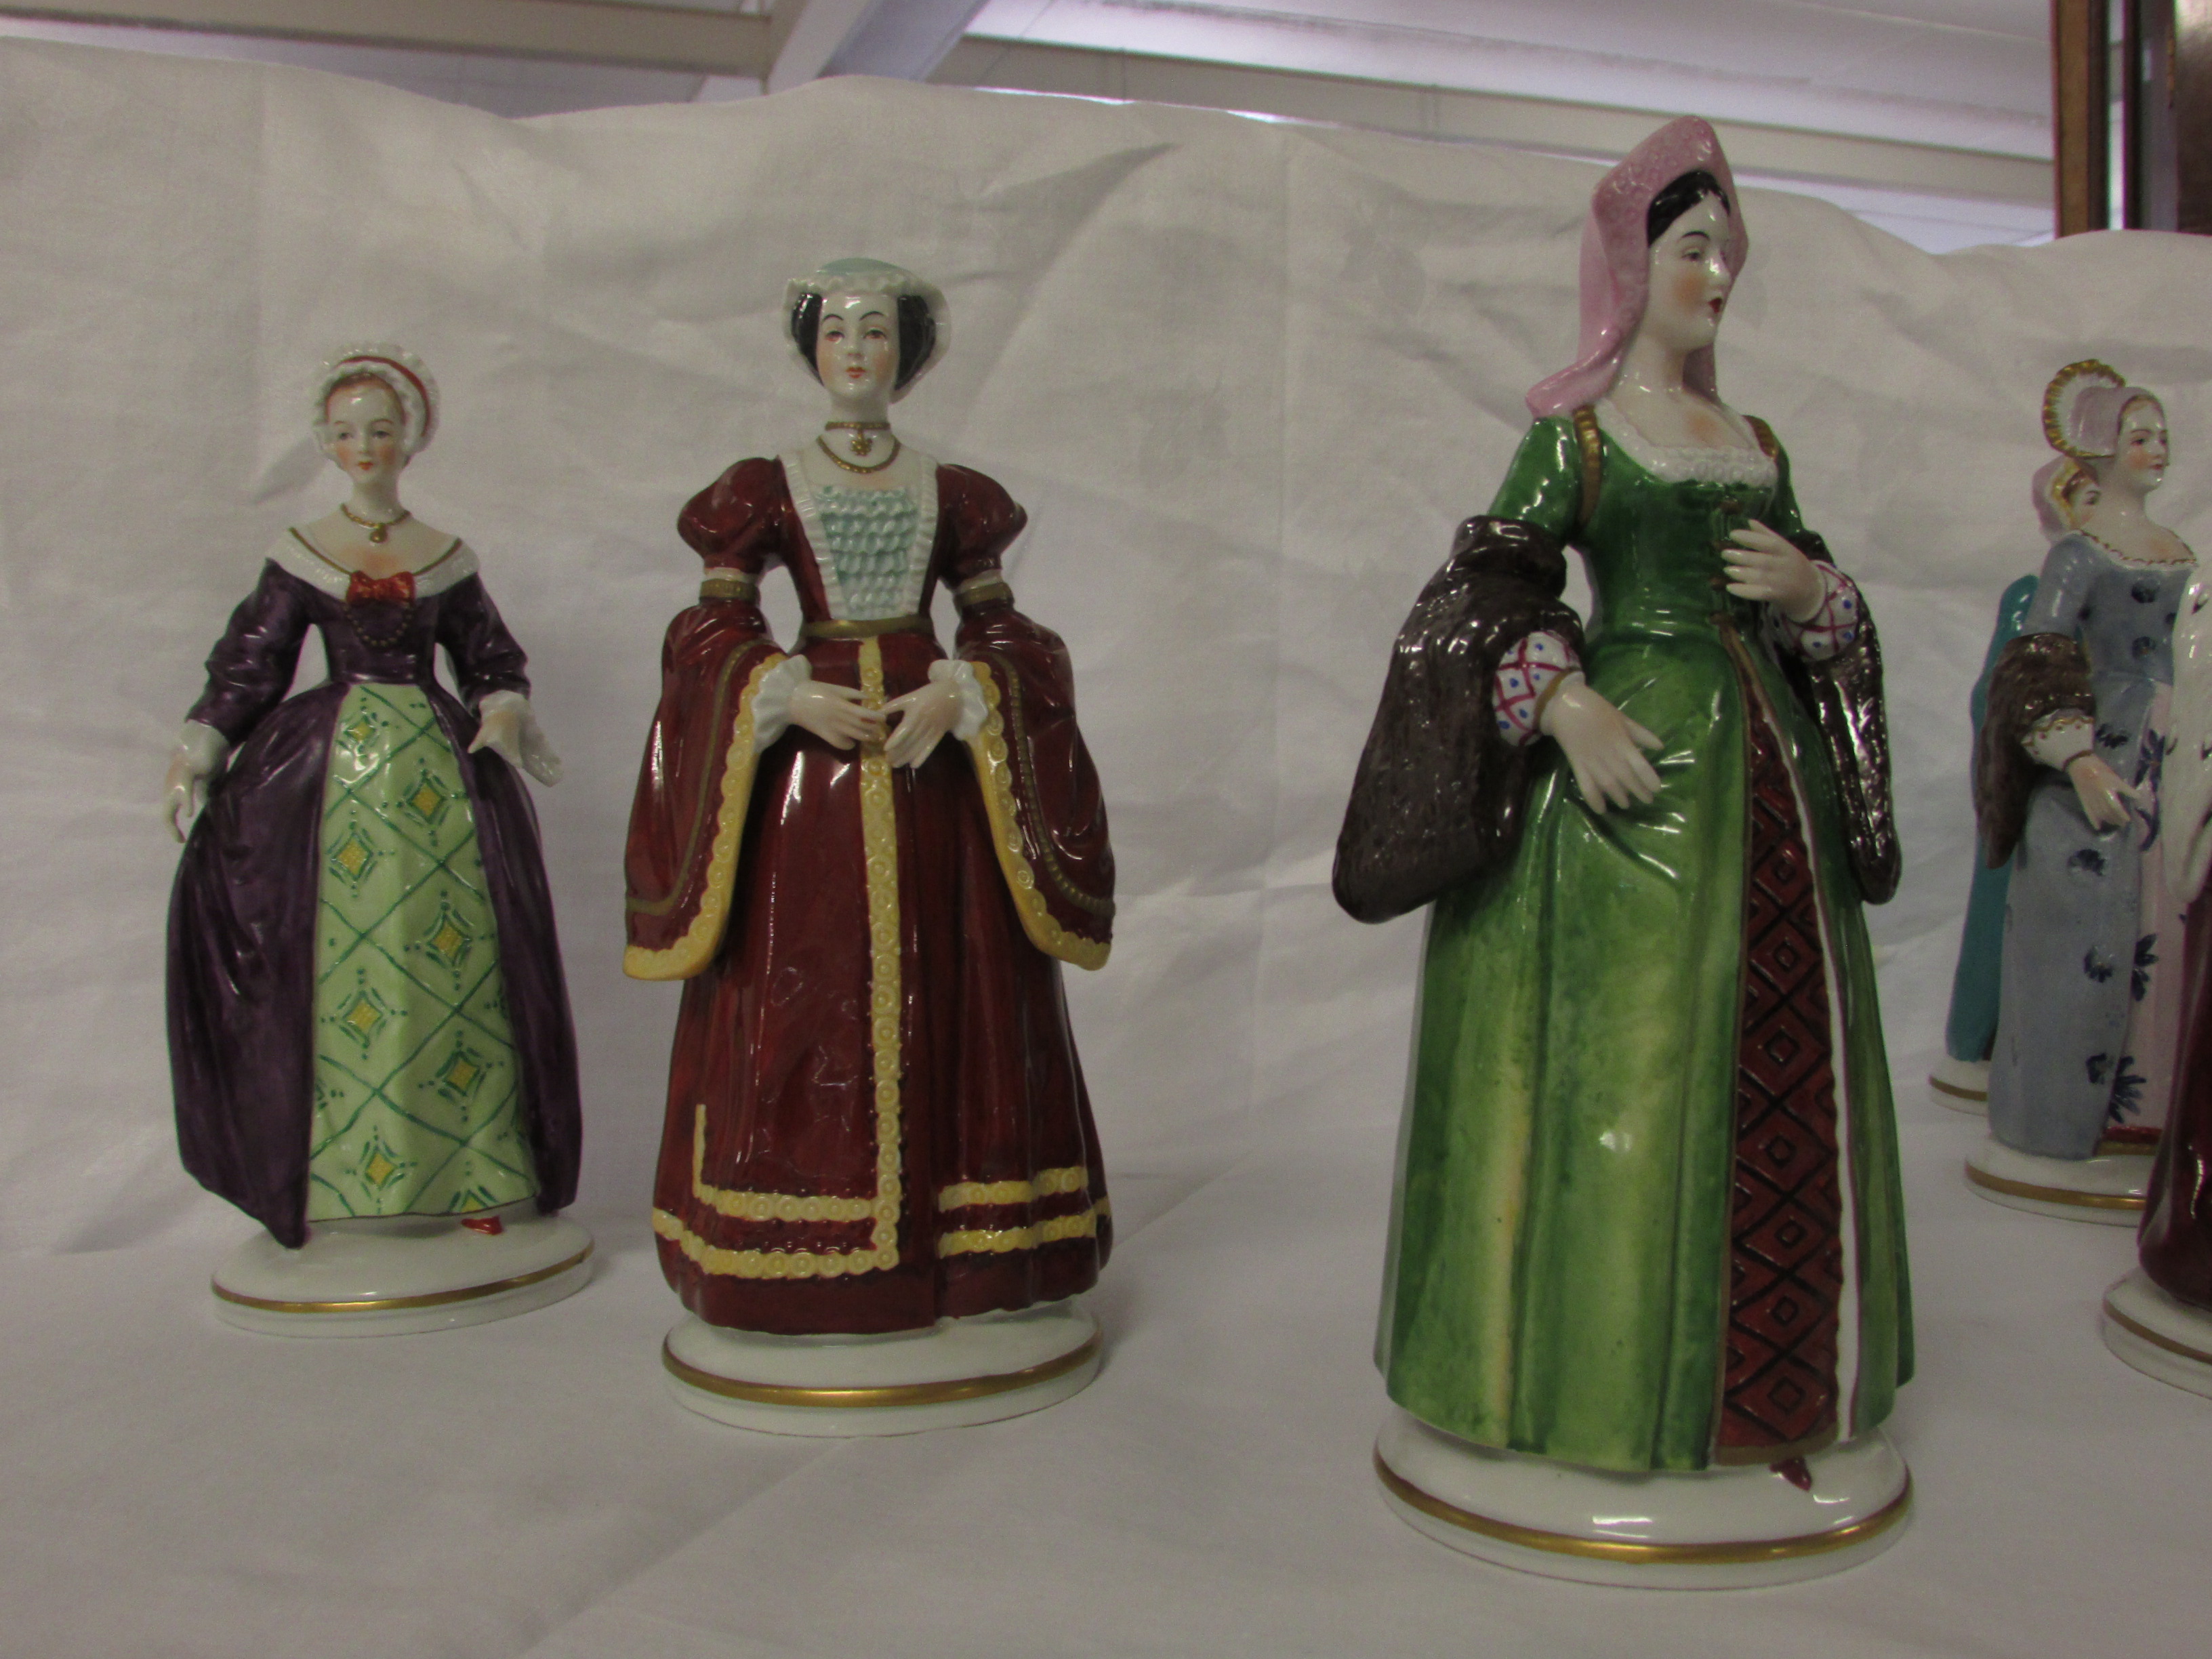 Set of Sitzendorf porcelain figures of Henry VIII and his six wives - Image 2 of 6